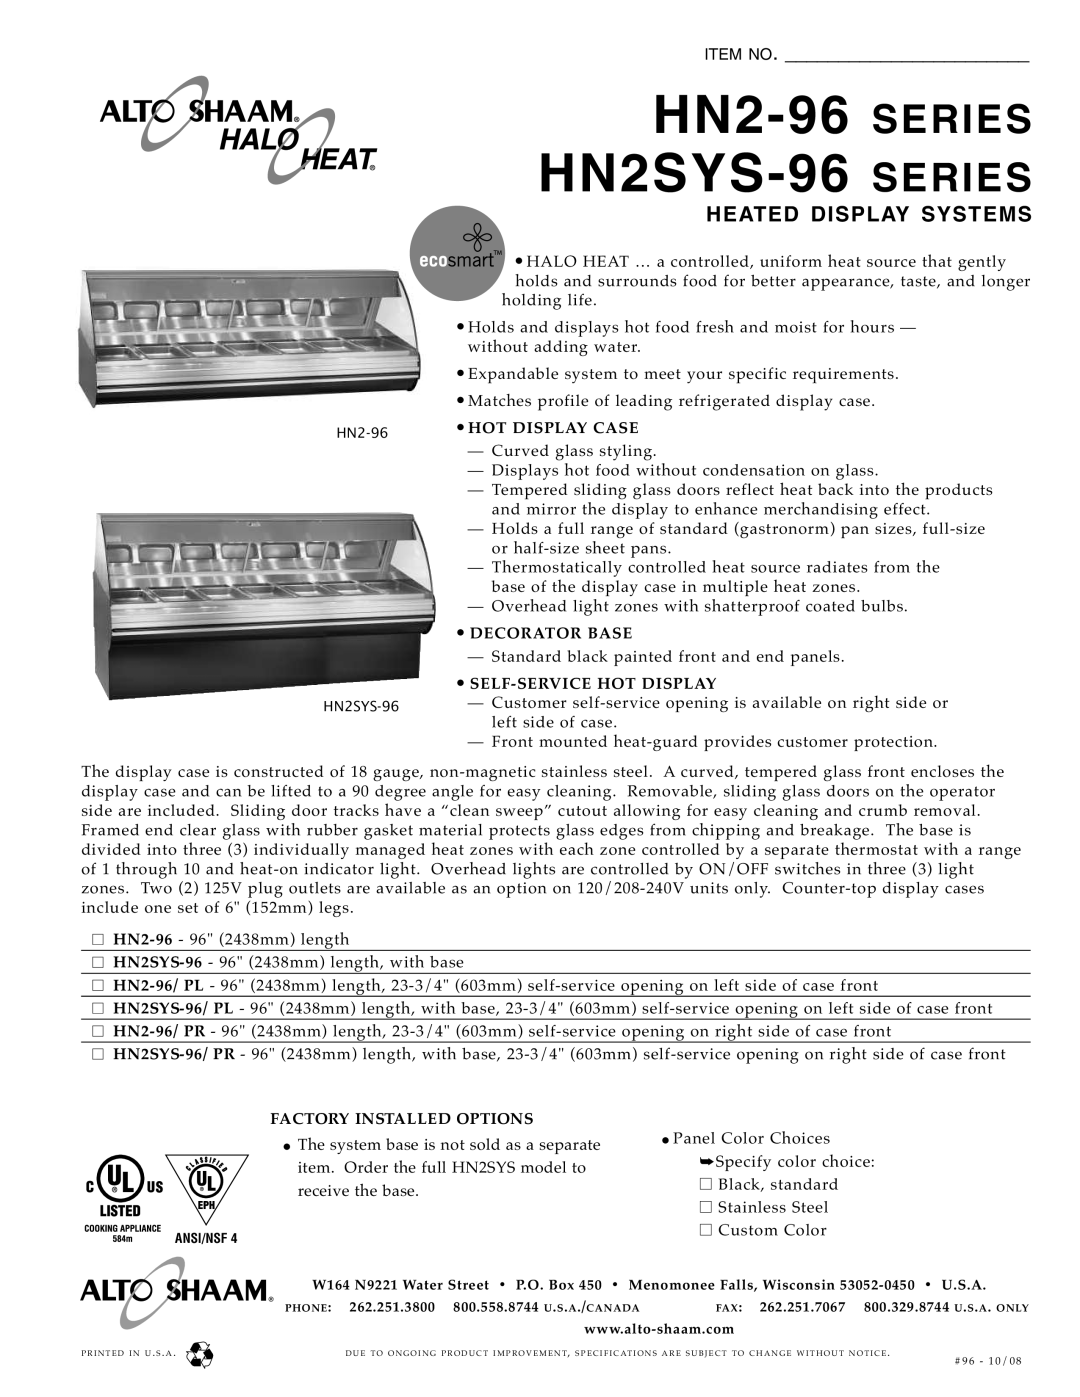 Alto-Shaam HN2SYS-96 specifications HN2-96 HN2SYS-9, Series Series, Item No, Heated Display Systems 